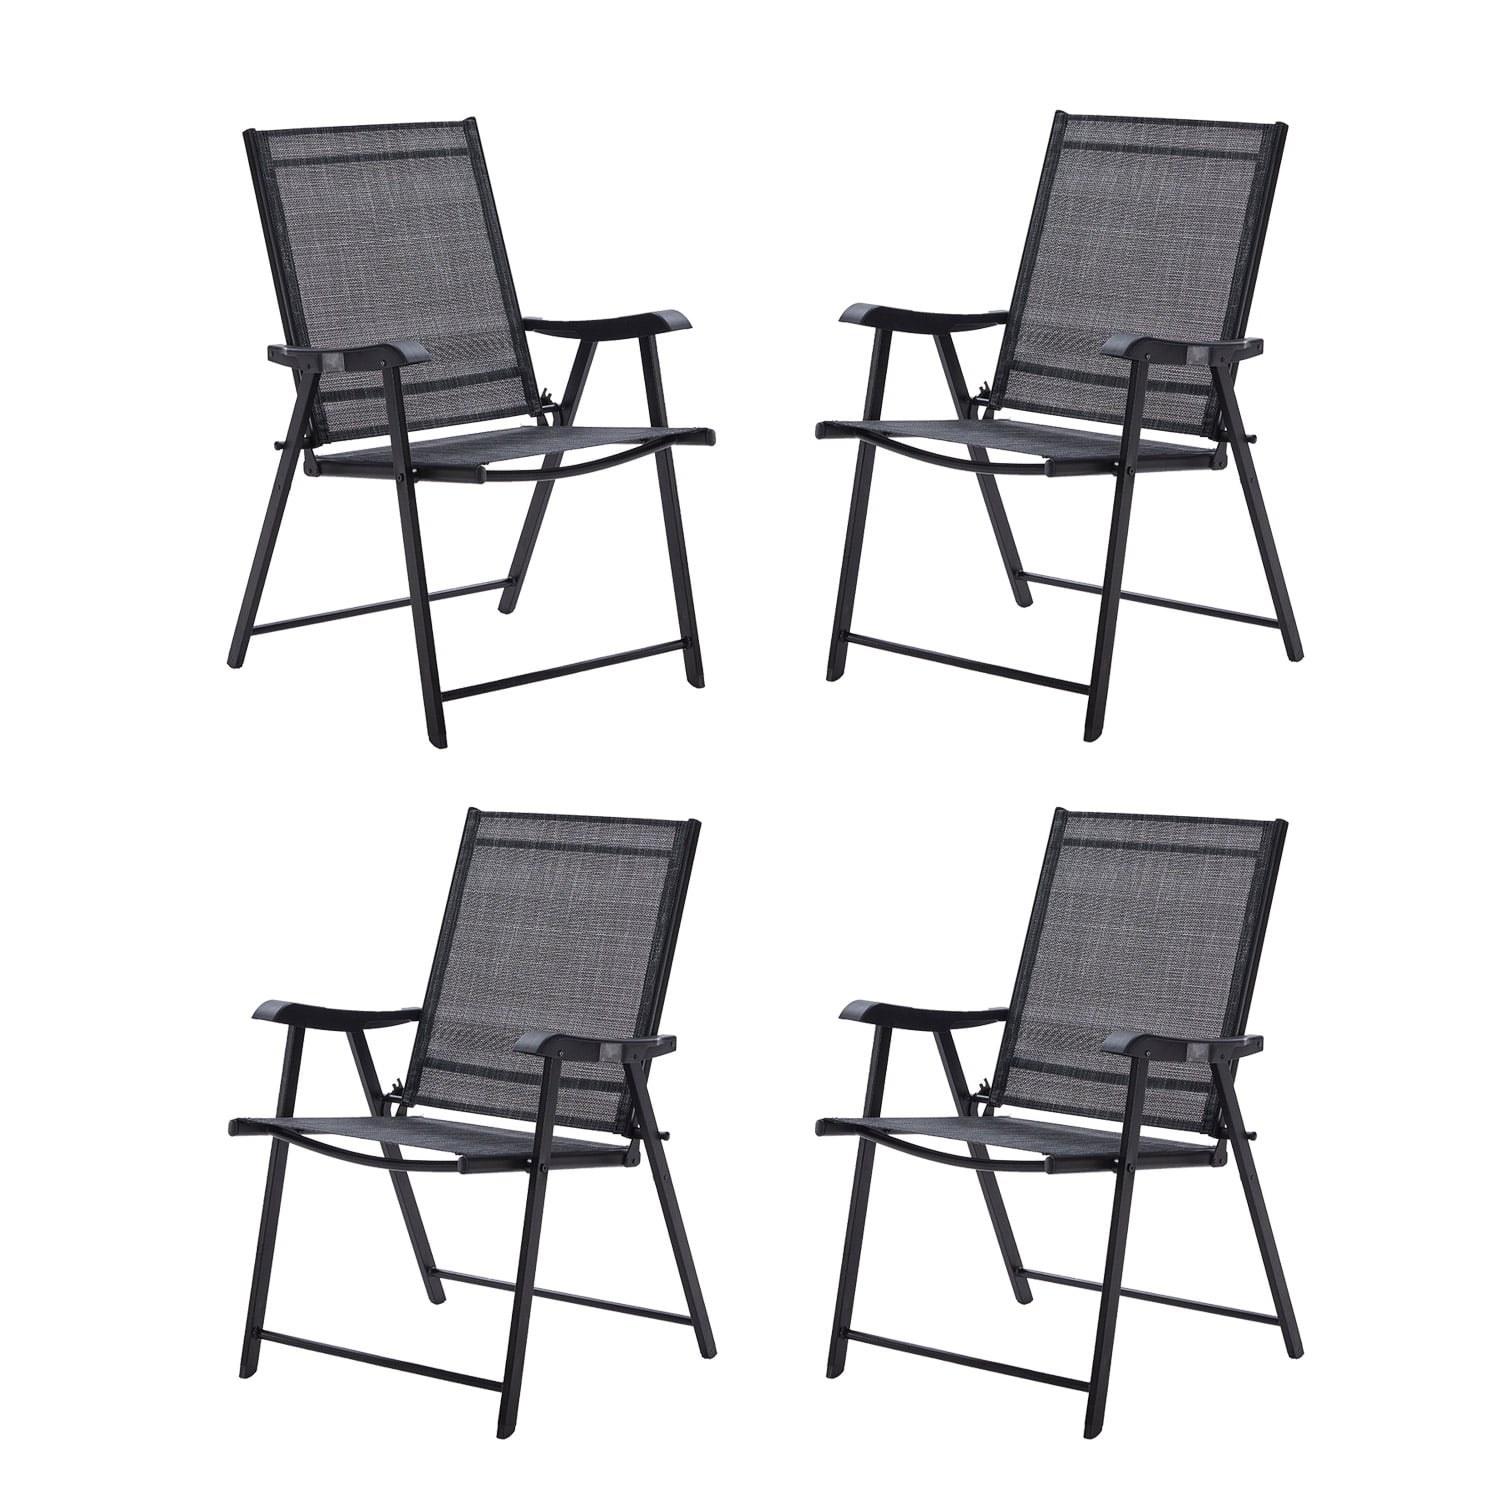 Courtyard Porch VICLLAX Folding Patio Chairs Set of 2 Outdoor Portable Metal Dining Chairs for Lawn Black Balcony & Garden 